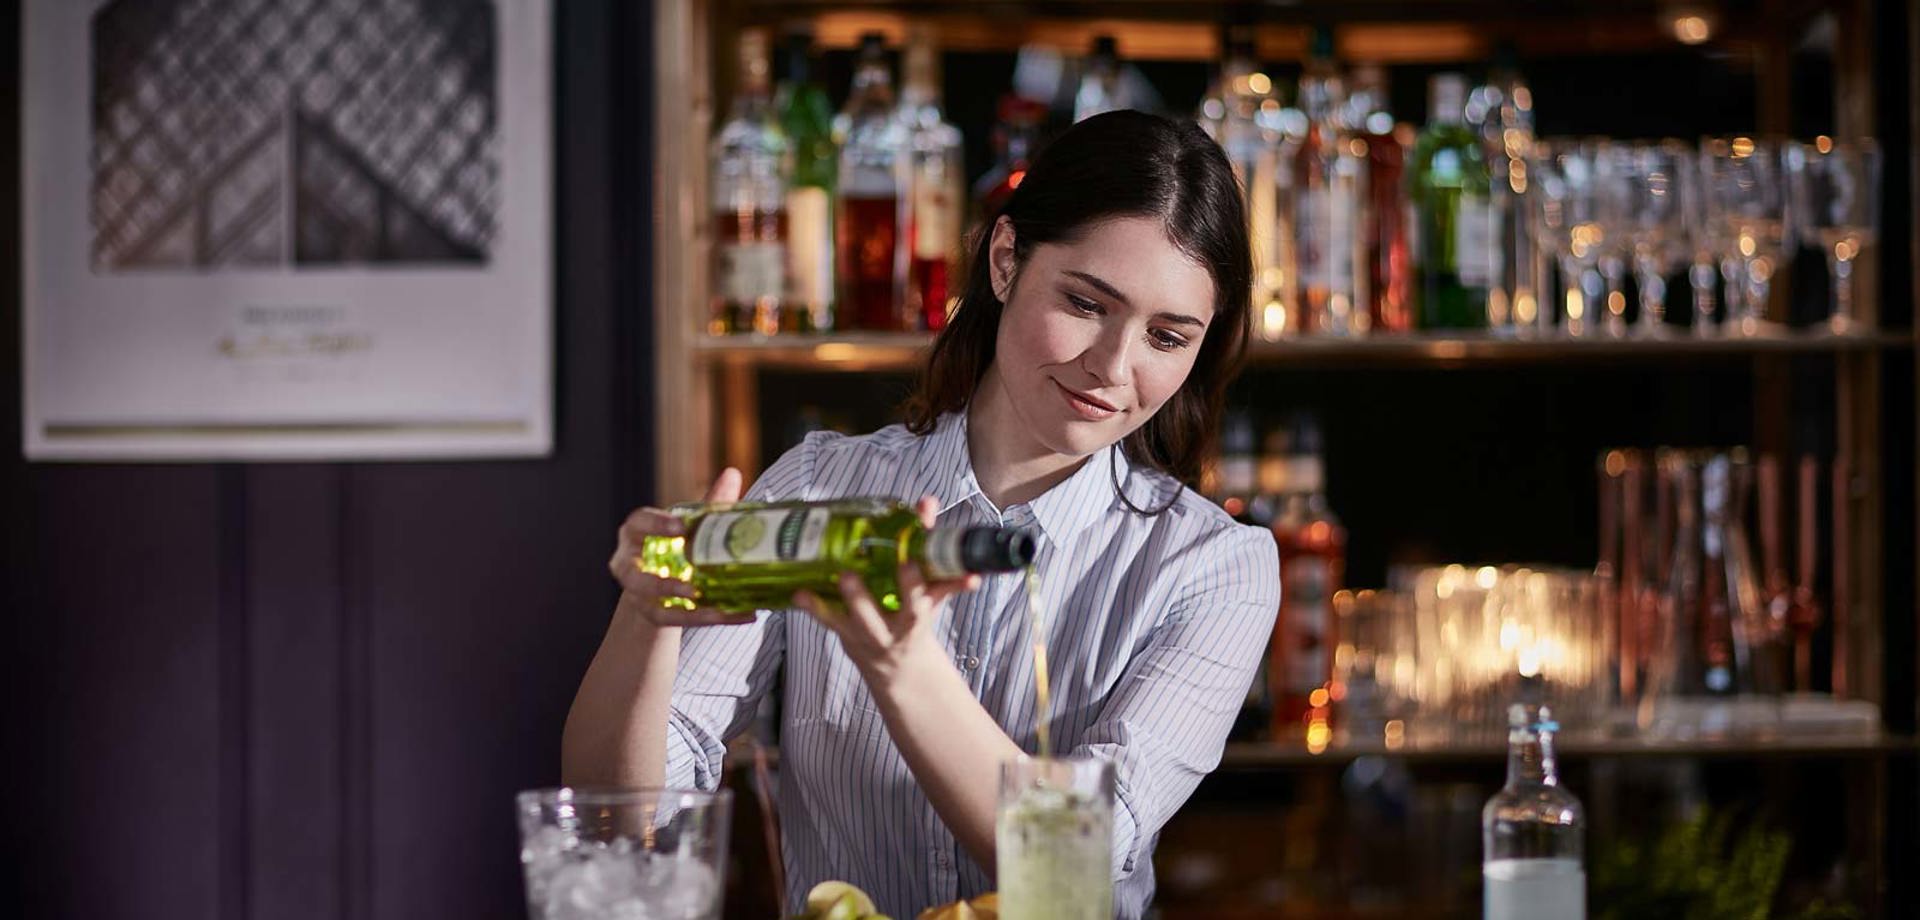 A female bartender standing behing a bar, pouring cocktail syrup into a glass. On the bar there is a glass filled with ice and bowls of lemon and lime wedges.